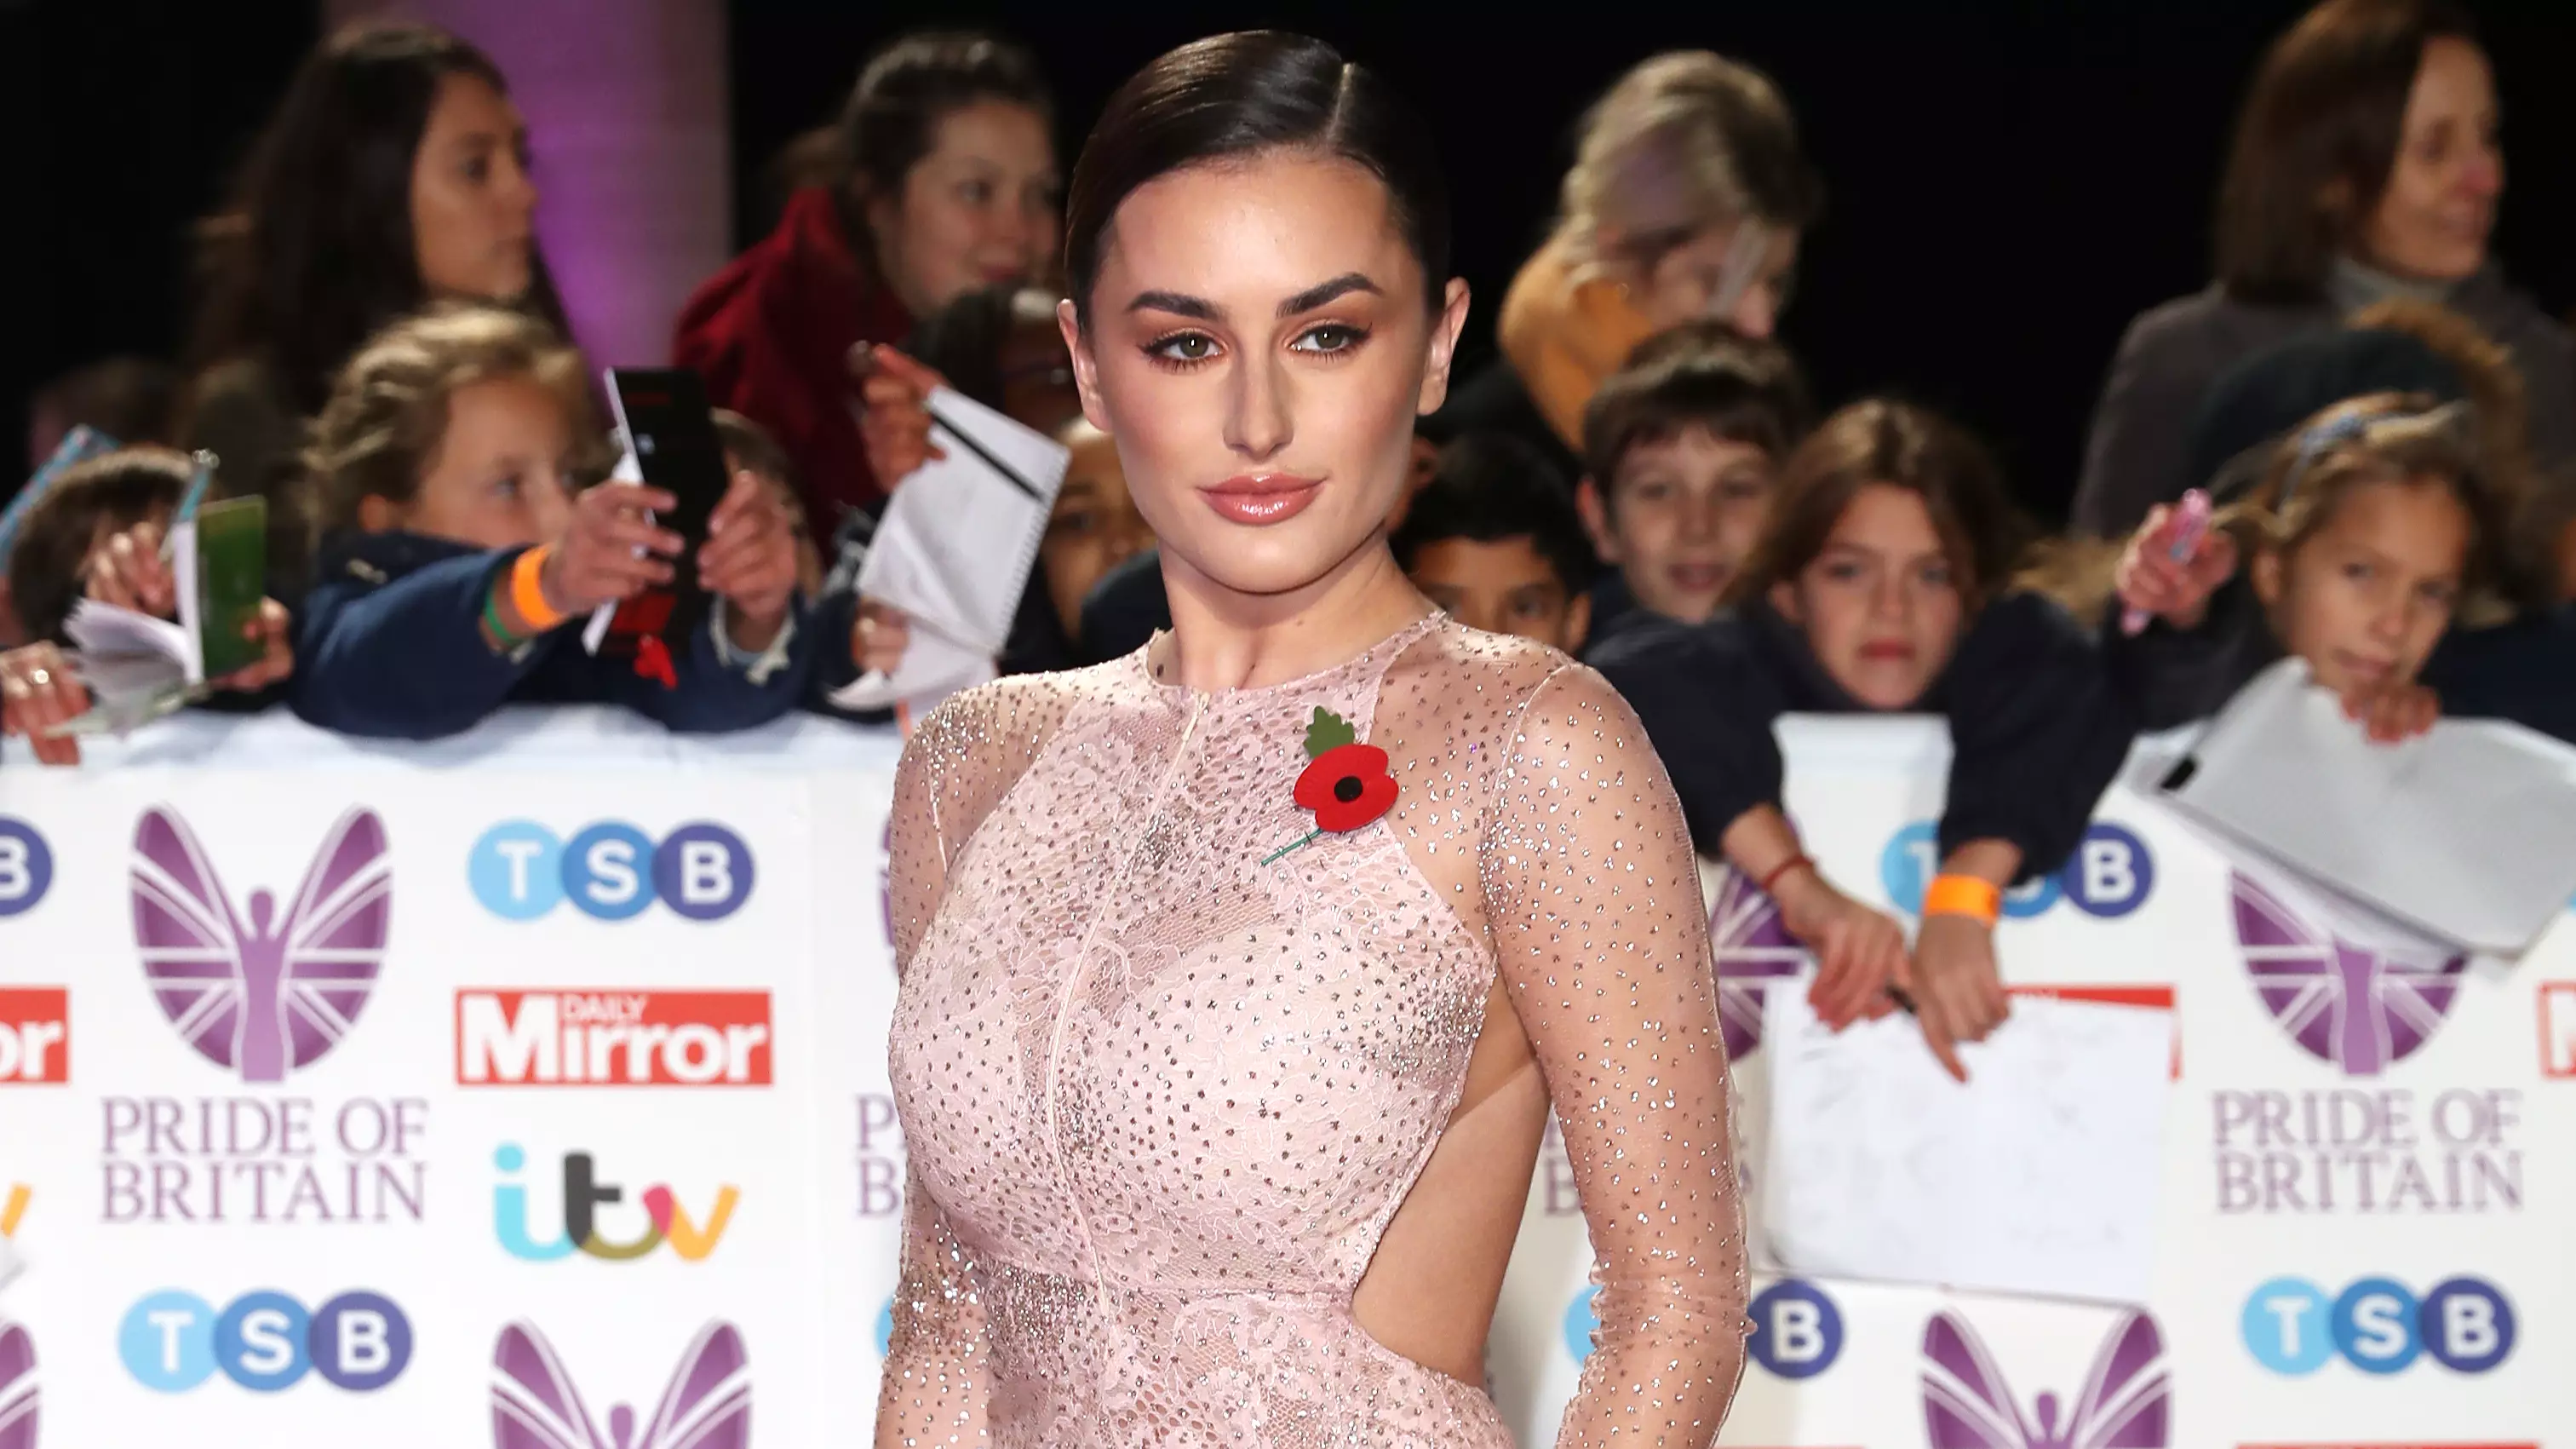 Amber Davies Shares Important Message After Being Rushed To Hospital Over Drink Spiking